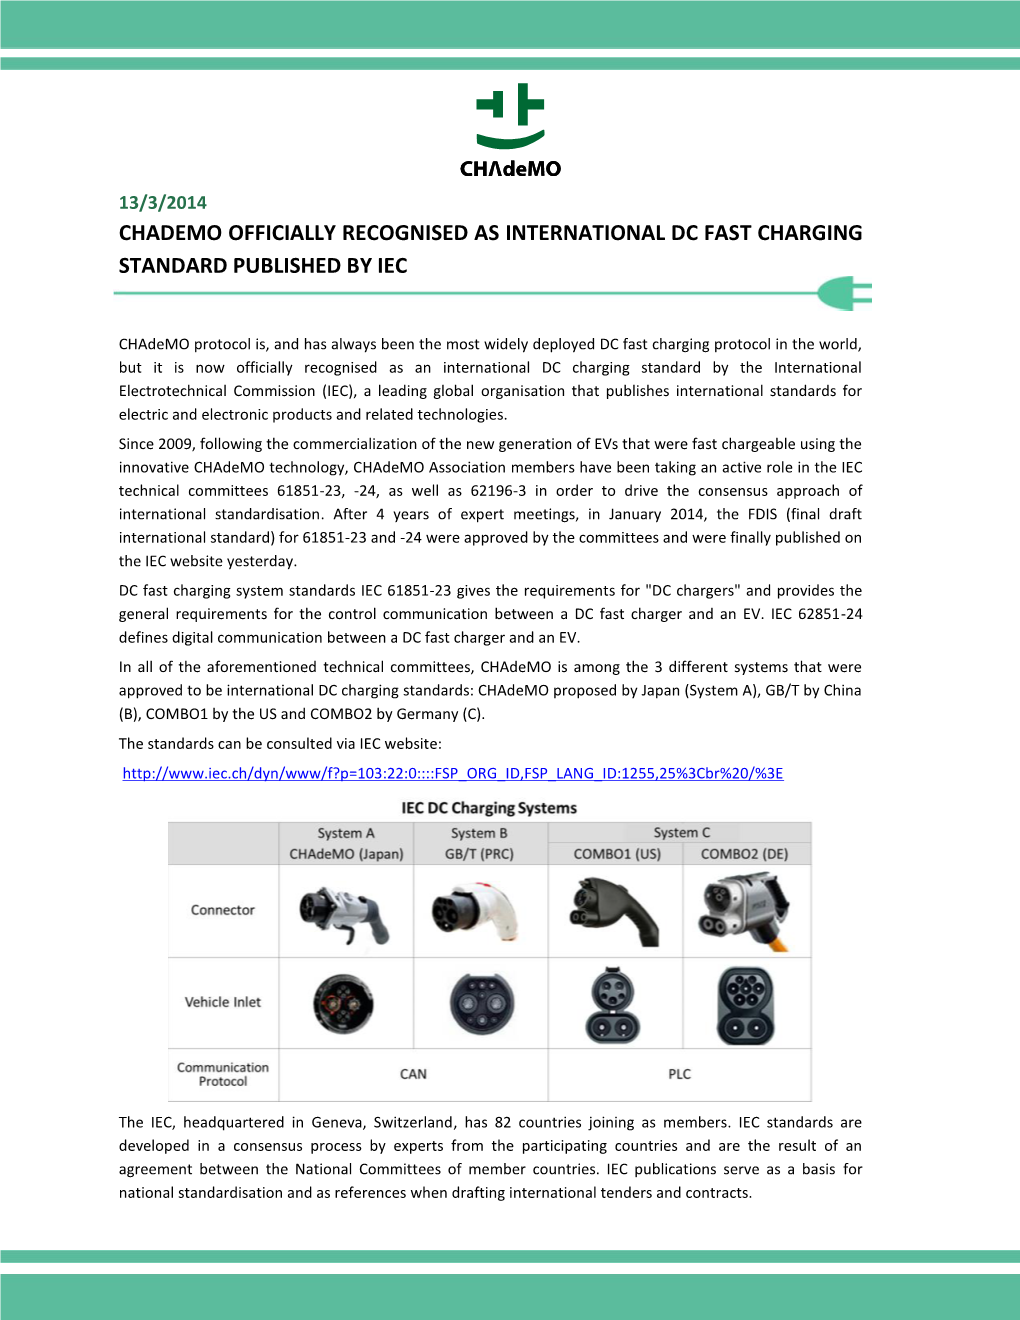 Chademo Officially Recognised As International Dc Fast Charging Standard Published by Iec